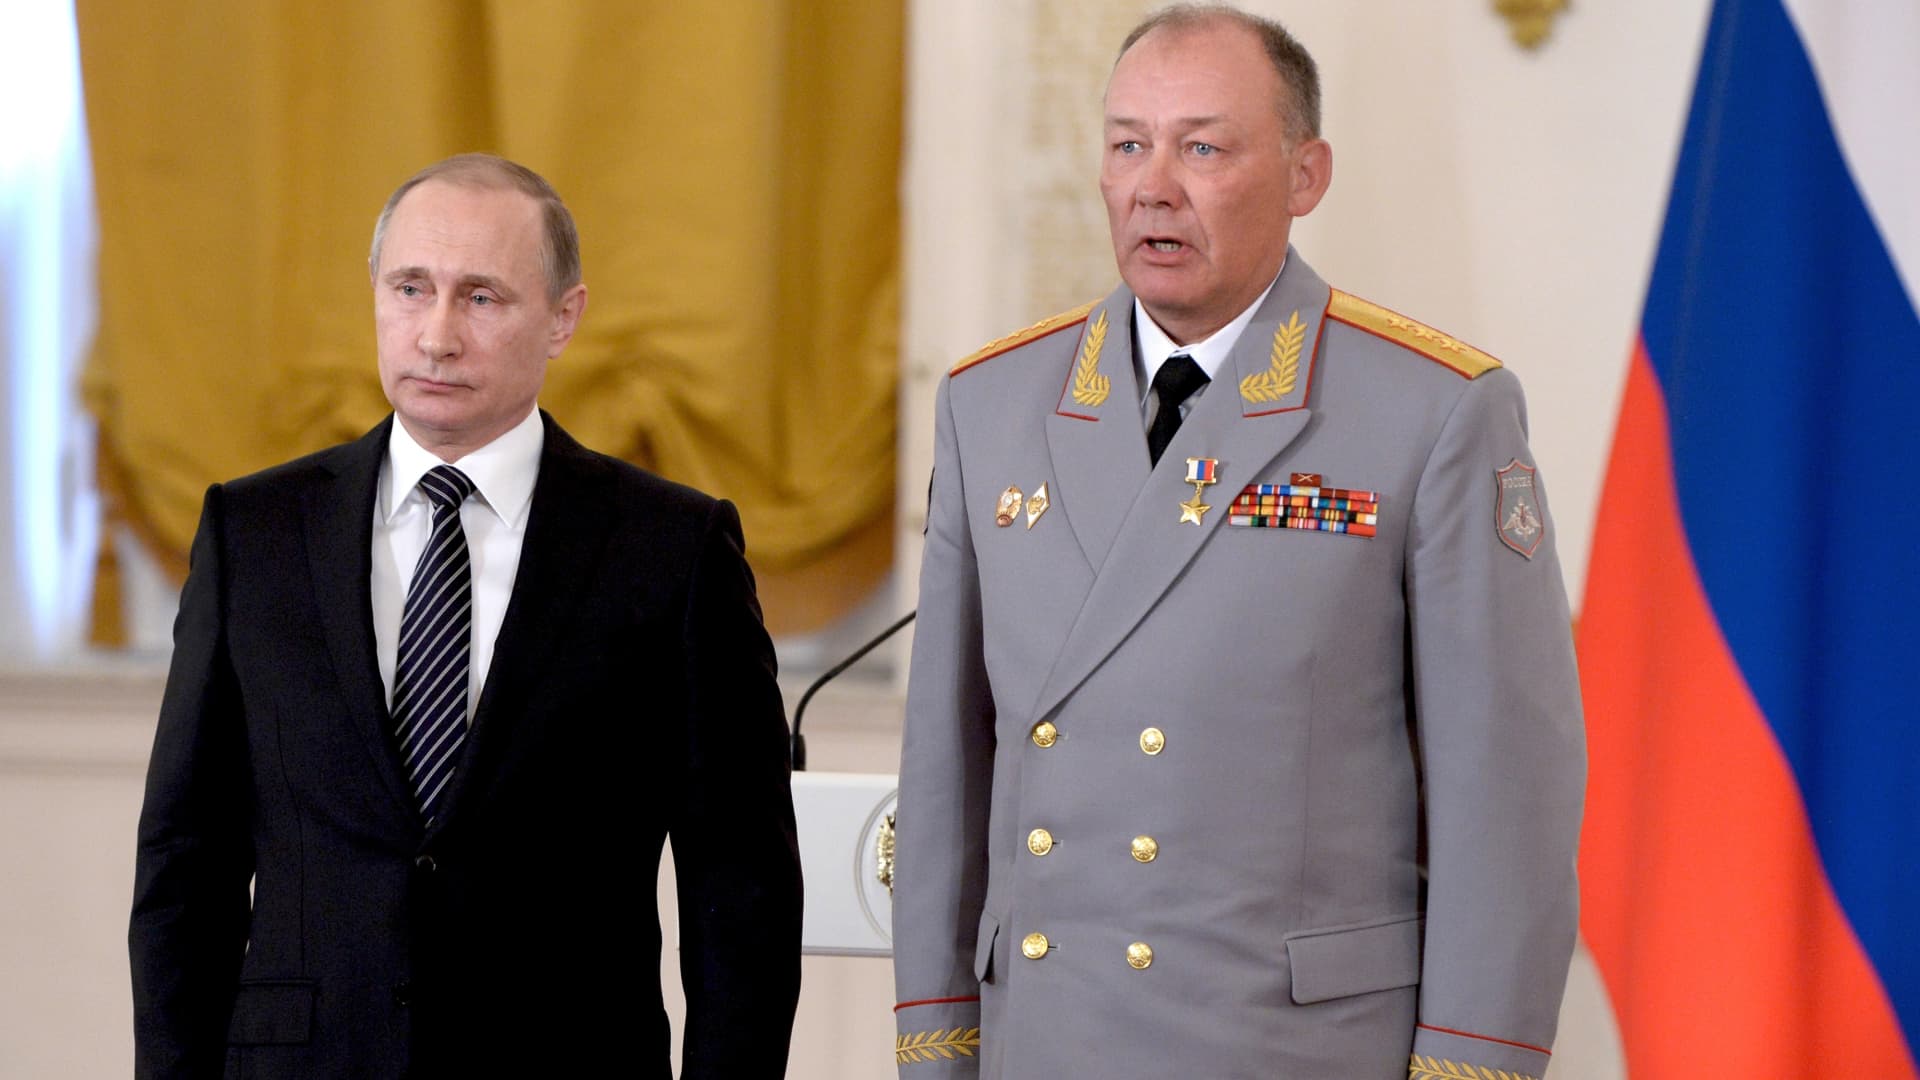 In this photo taken on March 17, 2016, Russian President Vladimir Putin, left, poses with Col. Gen. Alexander Dvornikov during an awarding ceremony in Moscow's Kremlin, Russia.